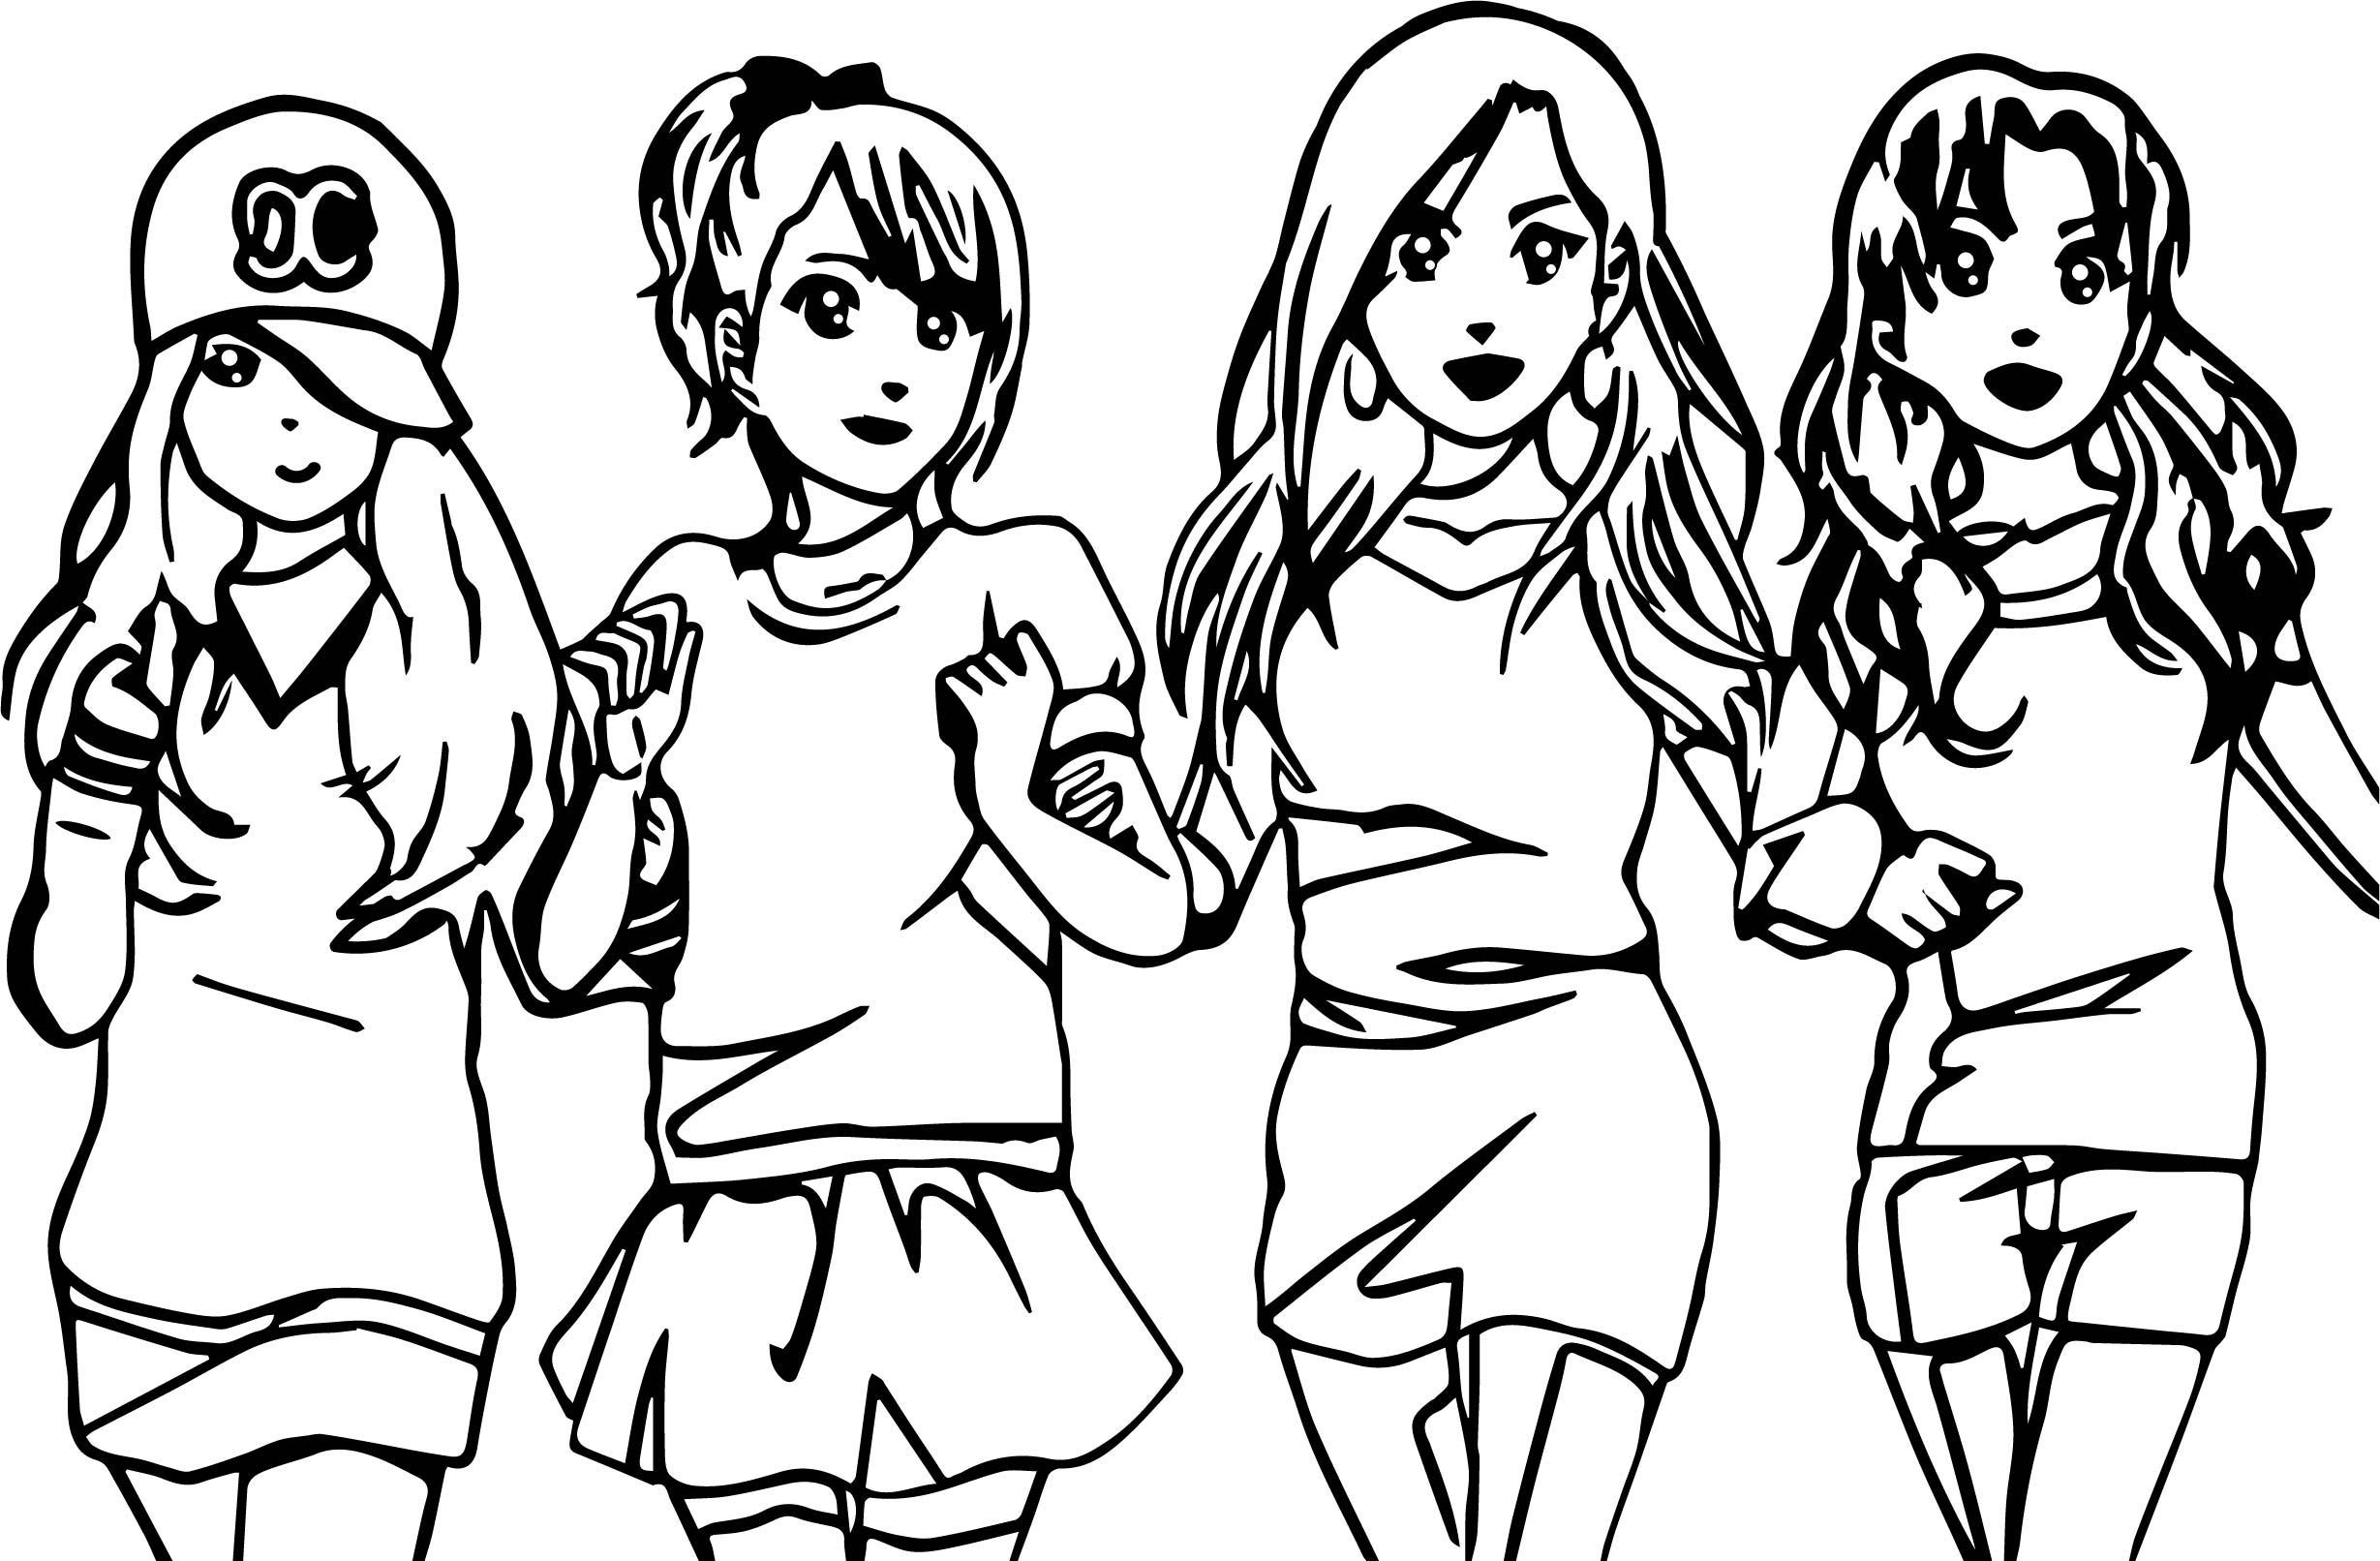 Best friends forever coloring pages